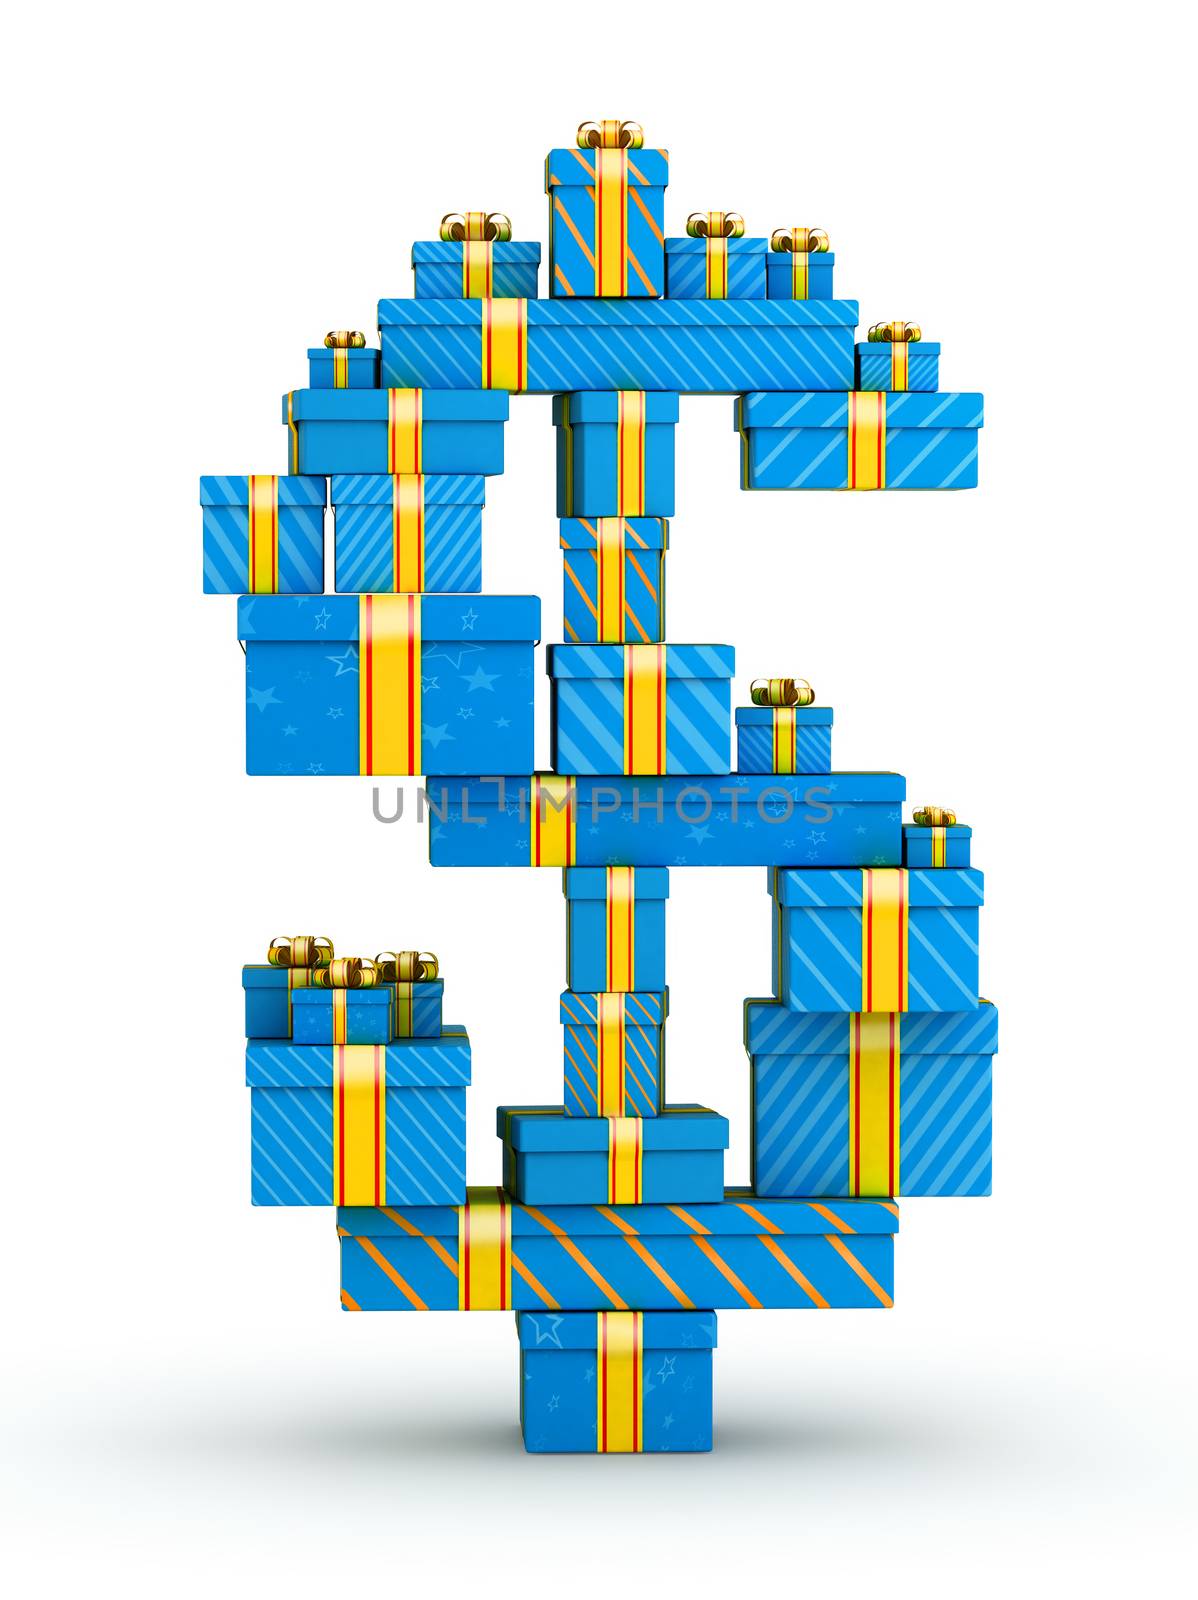 Dollar  sign  from blue gift boxes decorated with yellow ribbons